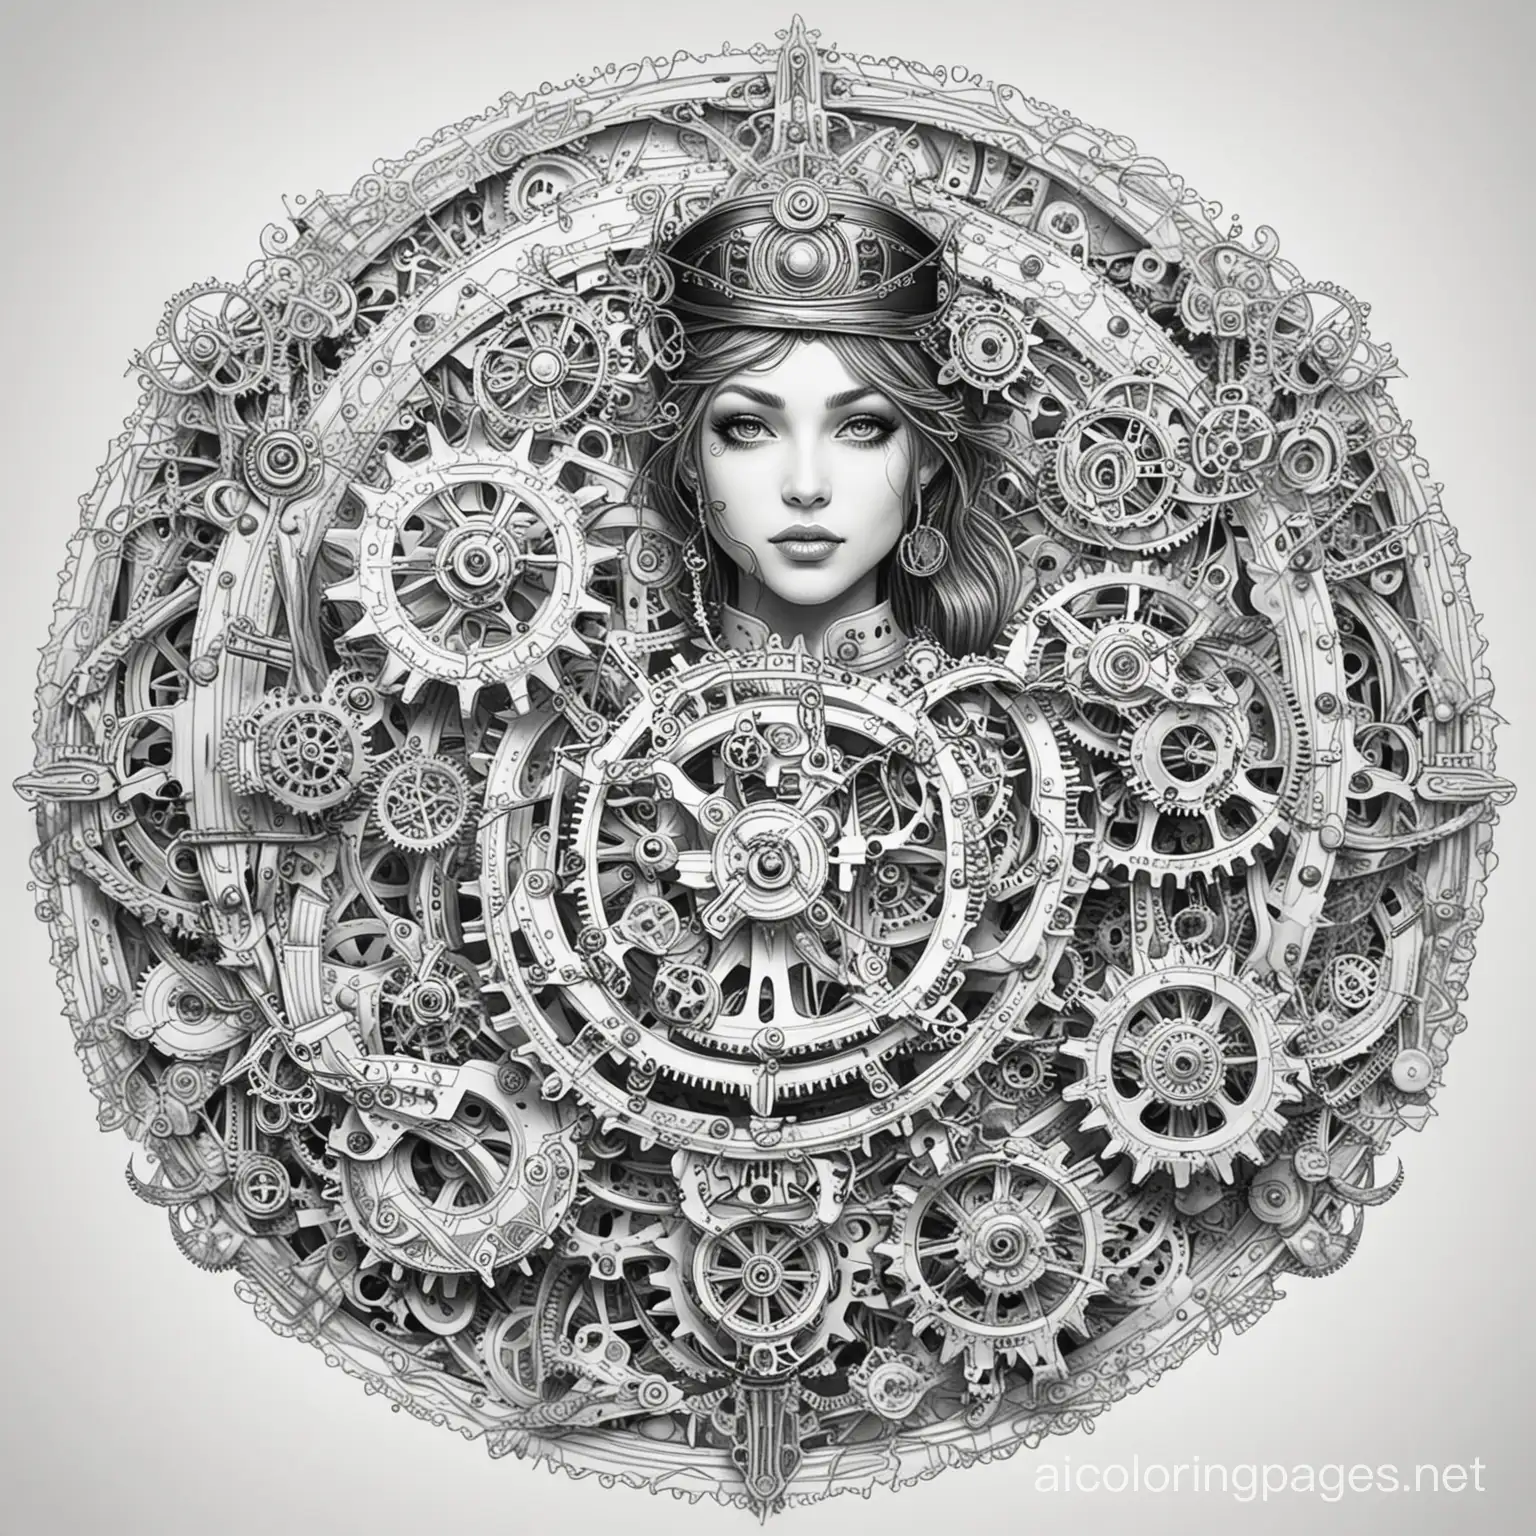 gothic steampunk and fusion of gothic and steampunk elements, with gears, clockwork, and victorian fashion, Coloring Page, black and white, line art, white background, Simplicity, Ample White Space. The background of the coloring page is plain white to make it easy for young children to color within the lines. The outlines of all the subjects are easy to distinguish, making it simple for kids to color without too much difficulty